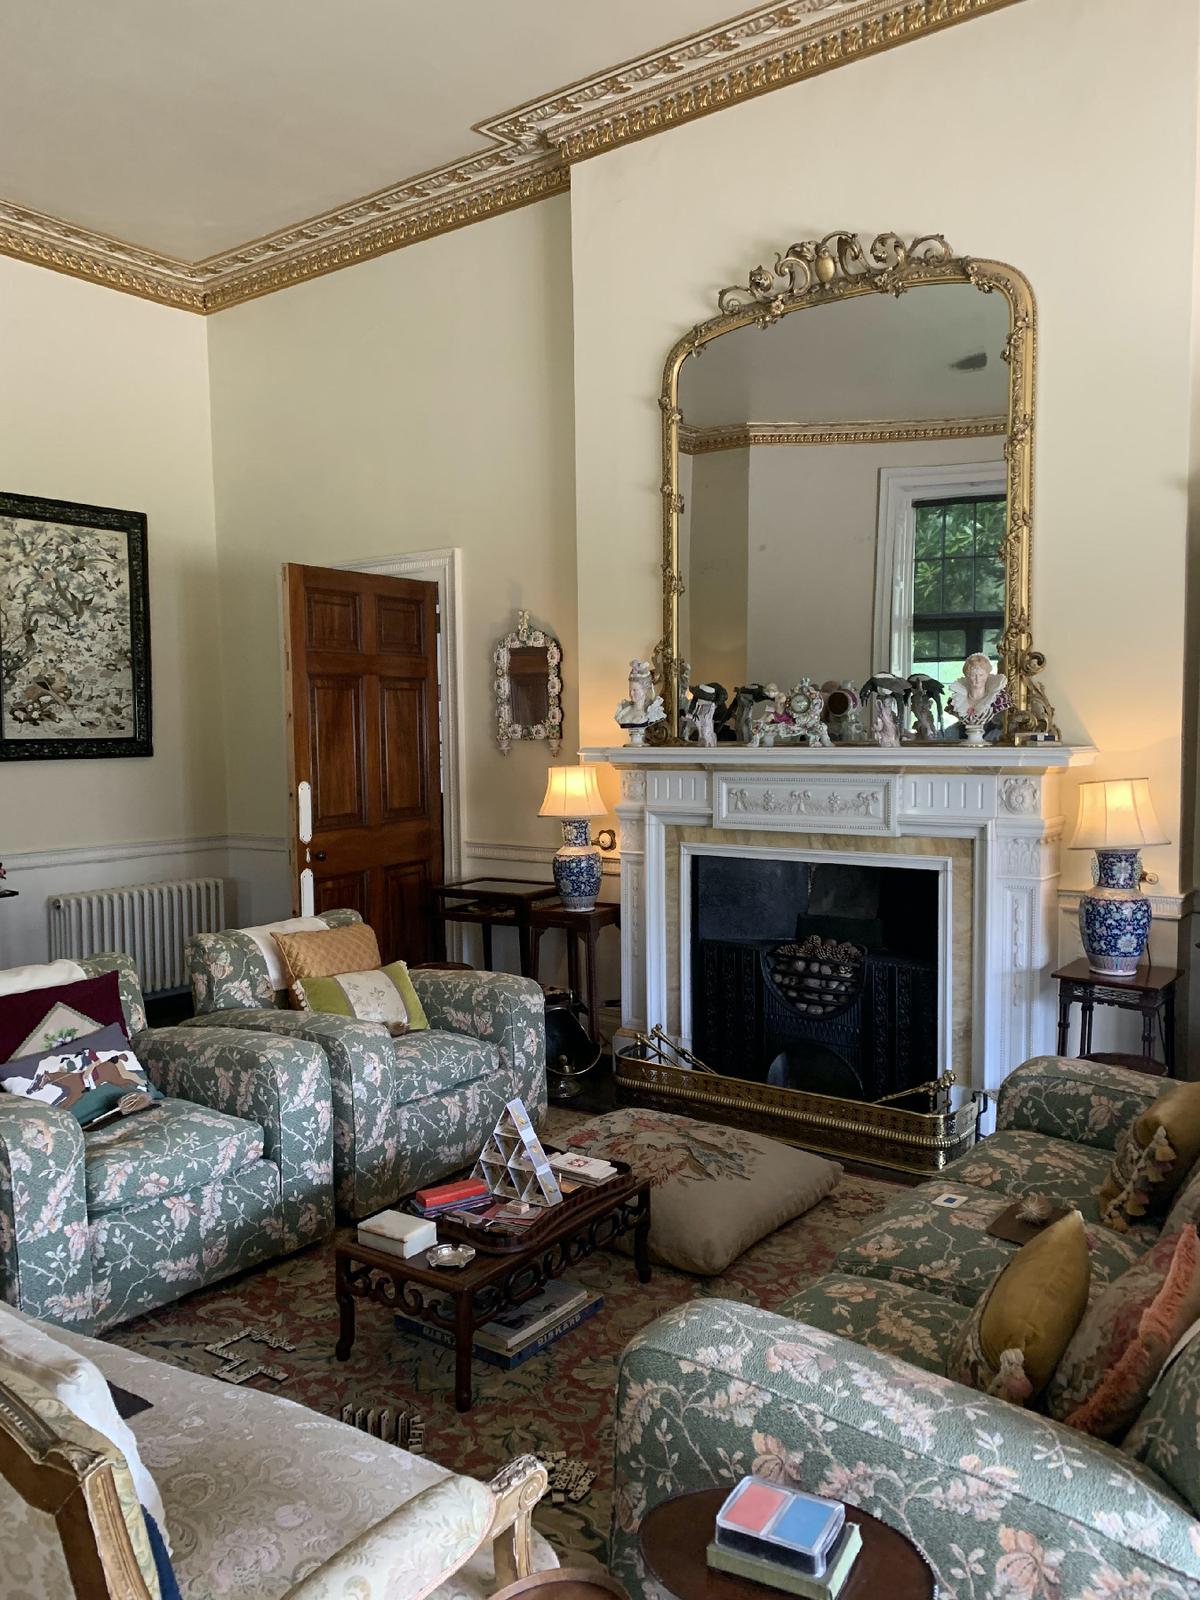 Agatha Christie made presentations from her mysteries to guests in the comfortable parlor at Greenway, her home on the south coast of England. (Courtesy of Sharon Whitley Larsen)